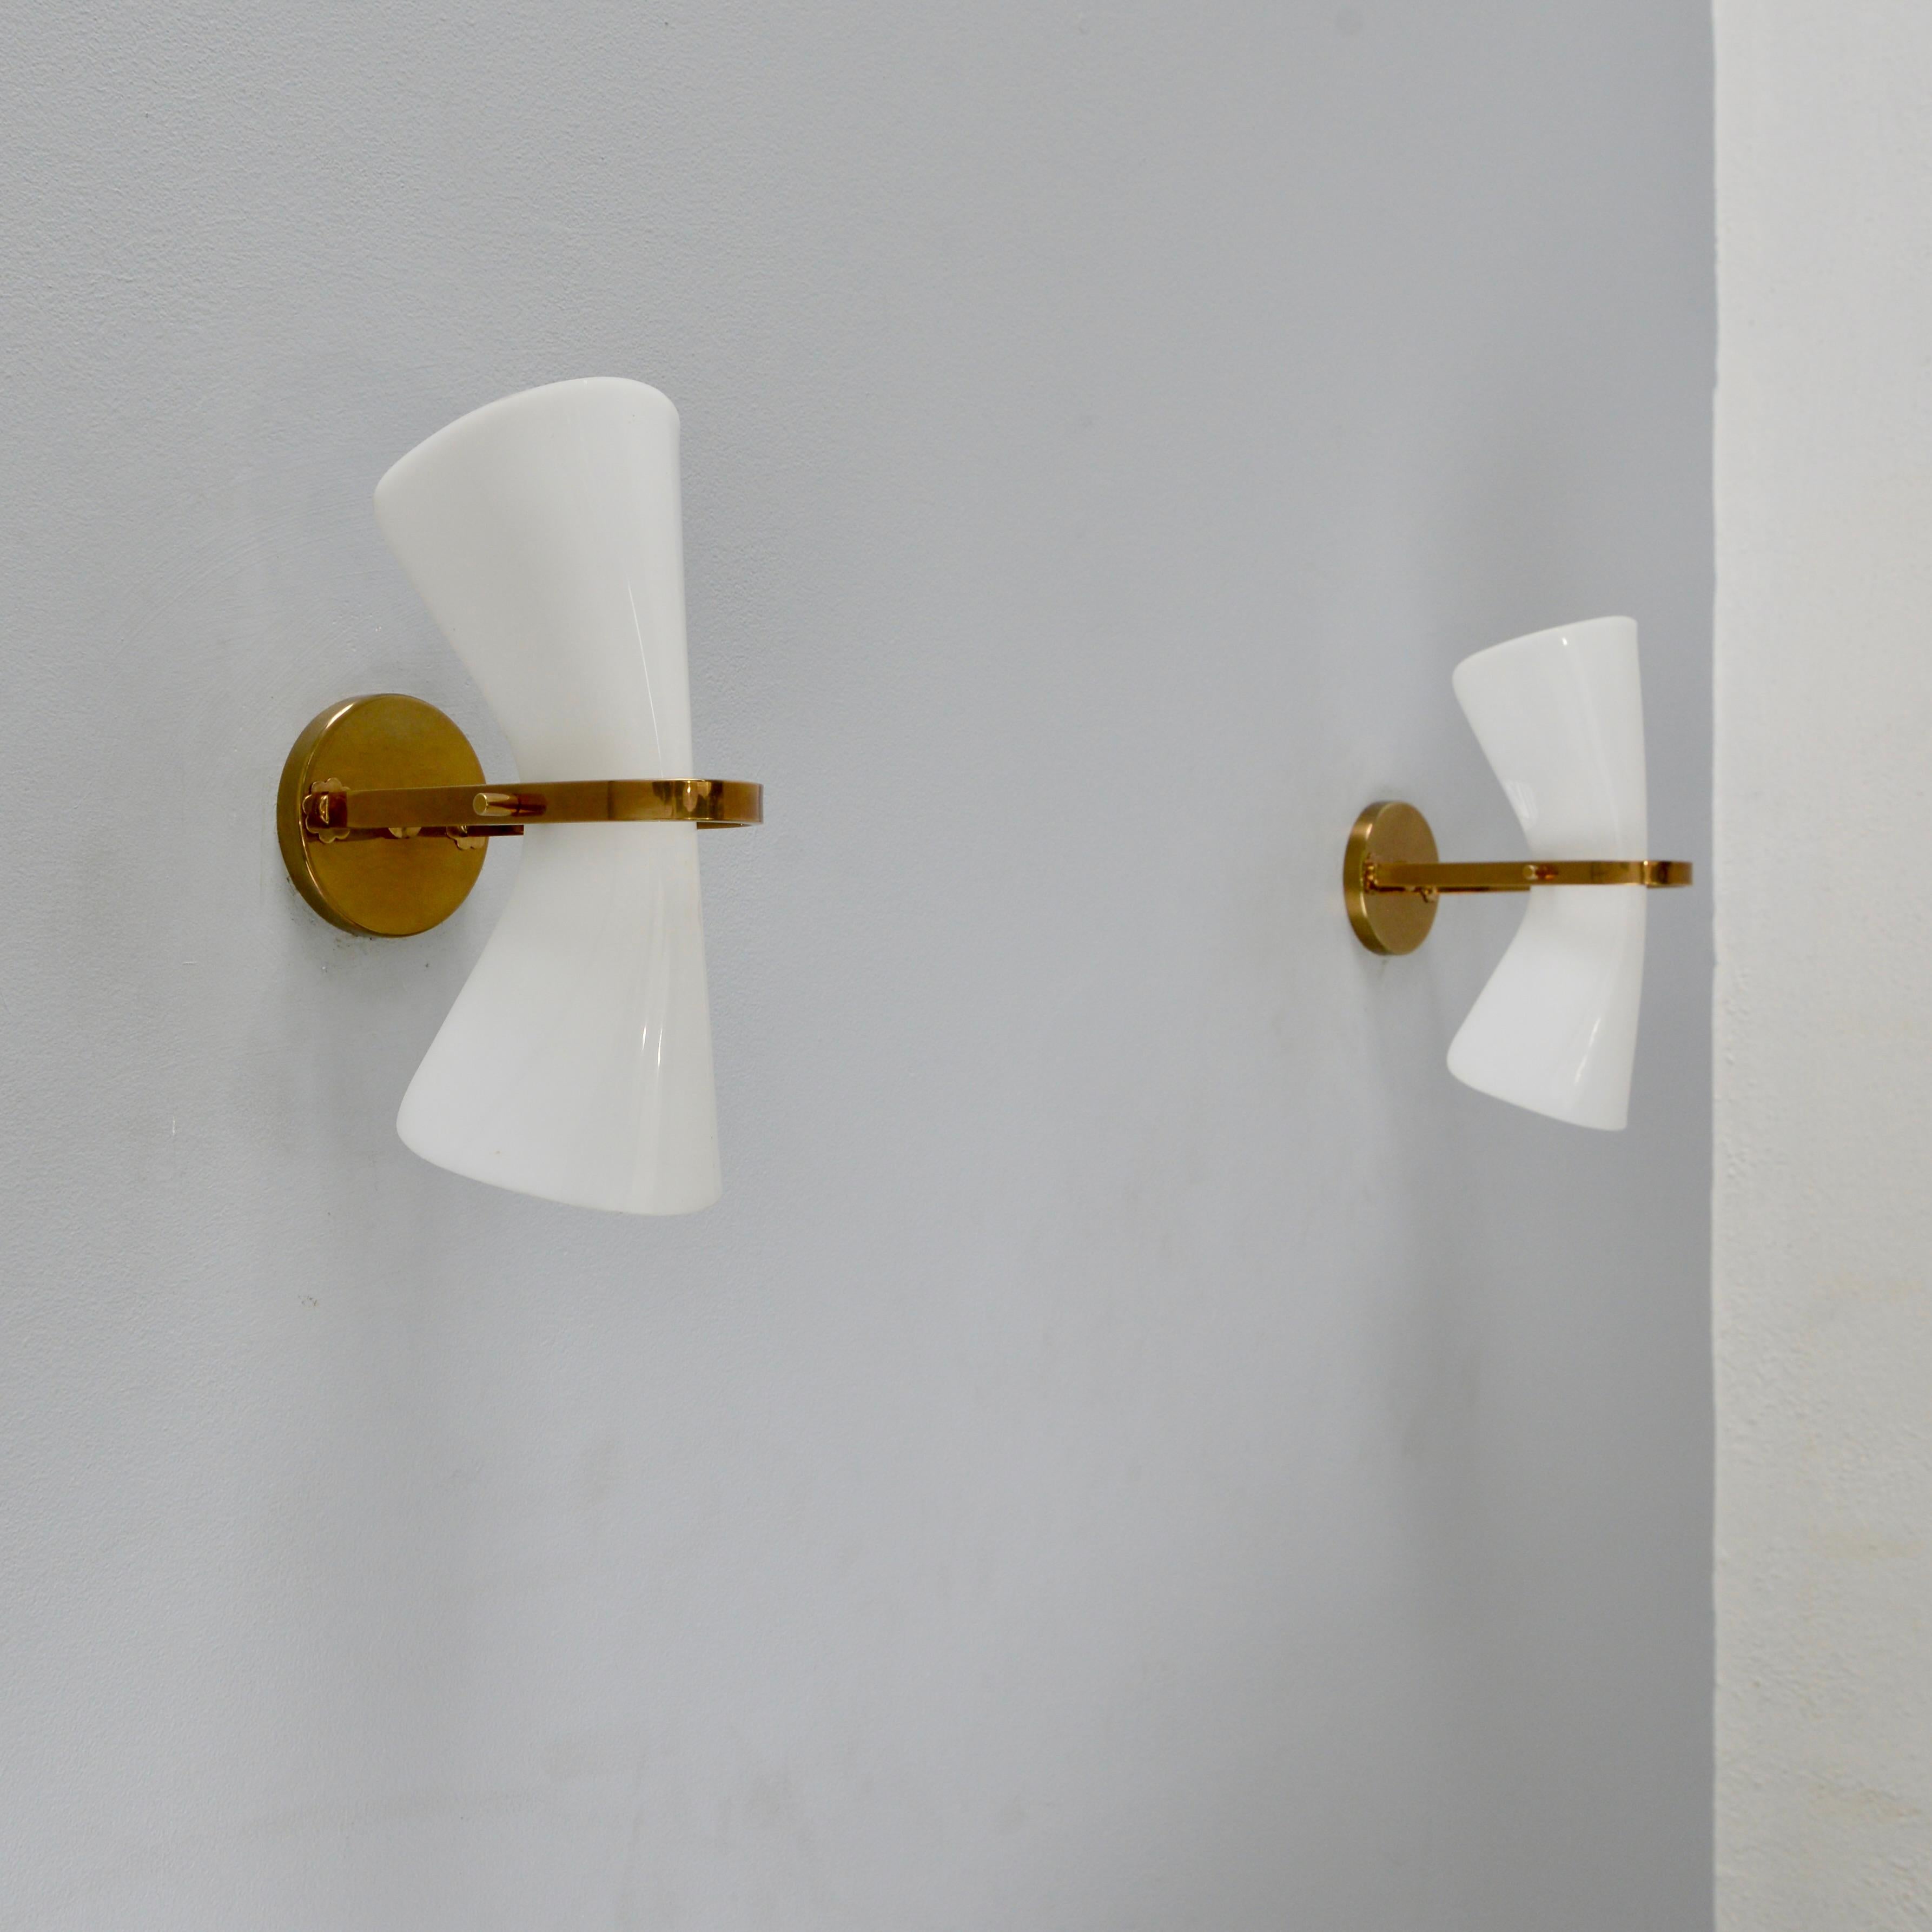 Elegant pair of Italian sconces from the 1950s attributed to Arredoluce. These sconces are in an aged solid brass finish and Metalcrilato, a high quality acrylic. Partially restored with (2) E12 candelabra based sockets per sconce, for use in the